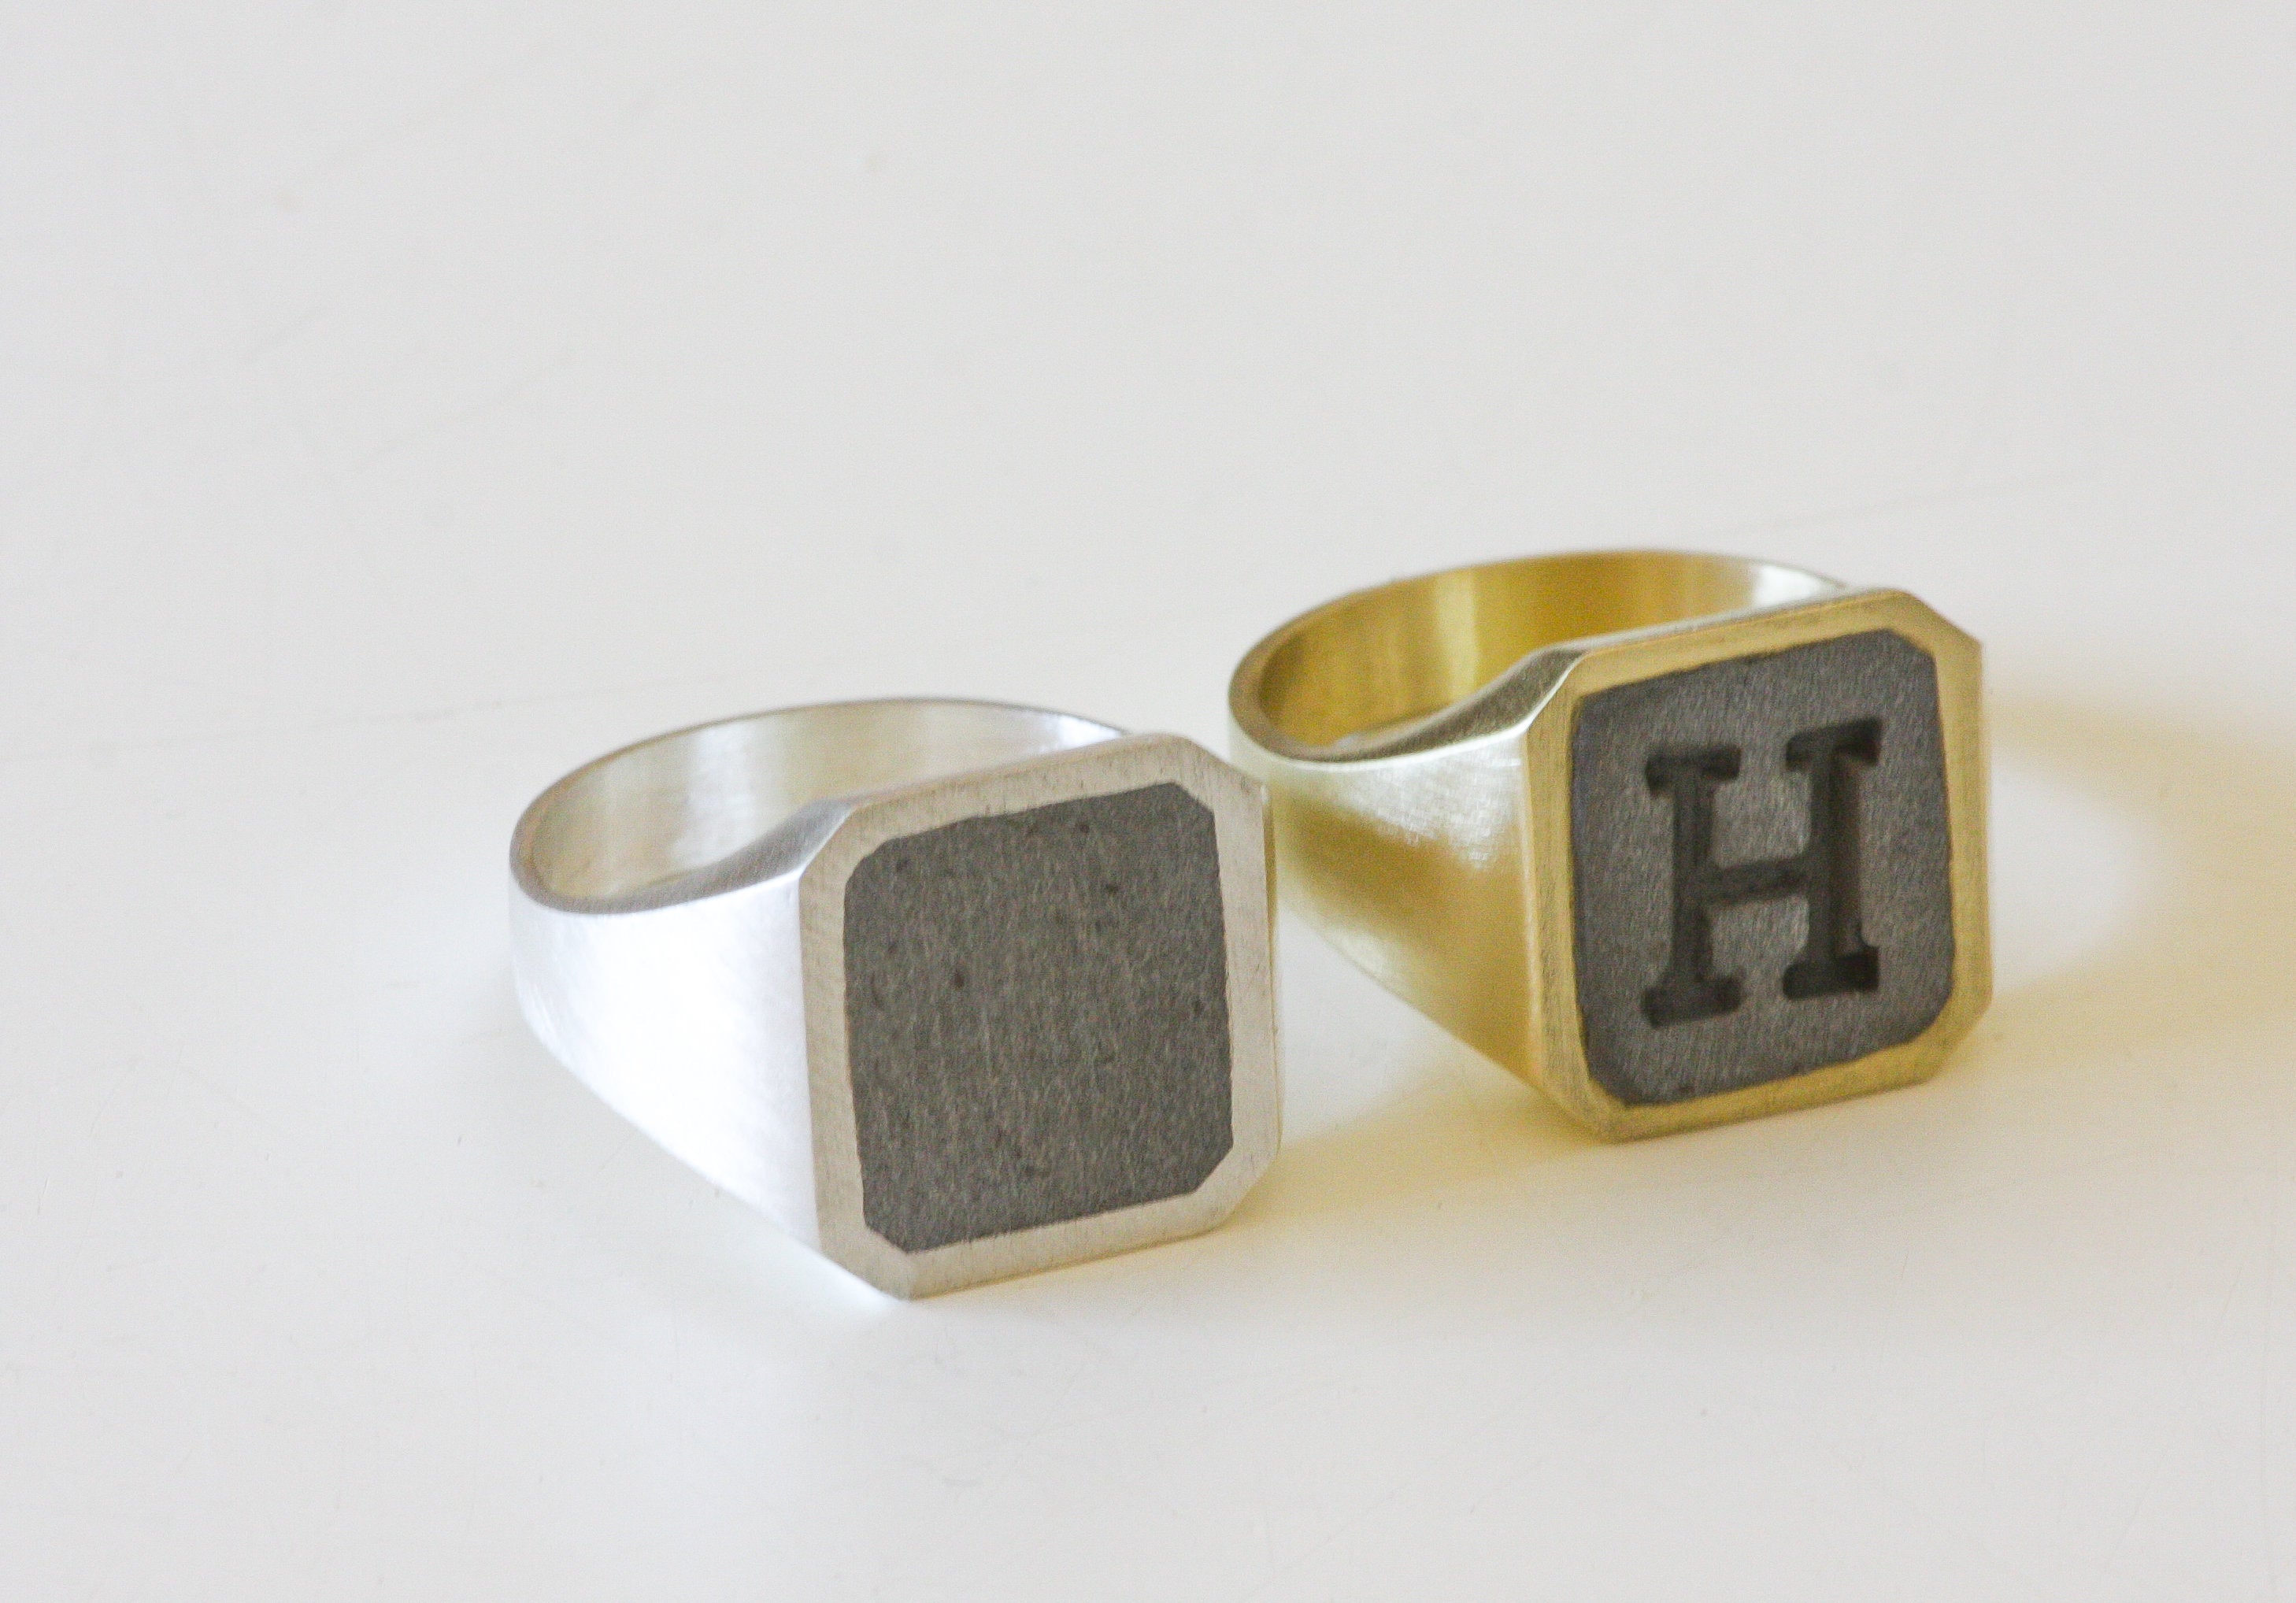 Gold and Concrete Signet Ring, Letter ring, Initial Square Ring, Cement Jewelry, Man Concrete Ring, Hadas Shaham - hs